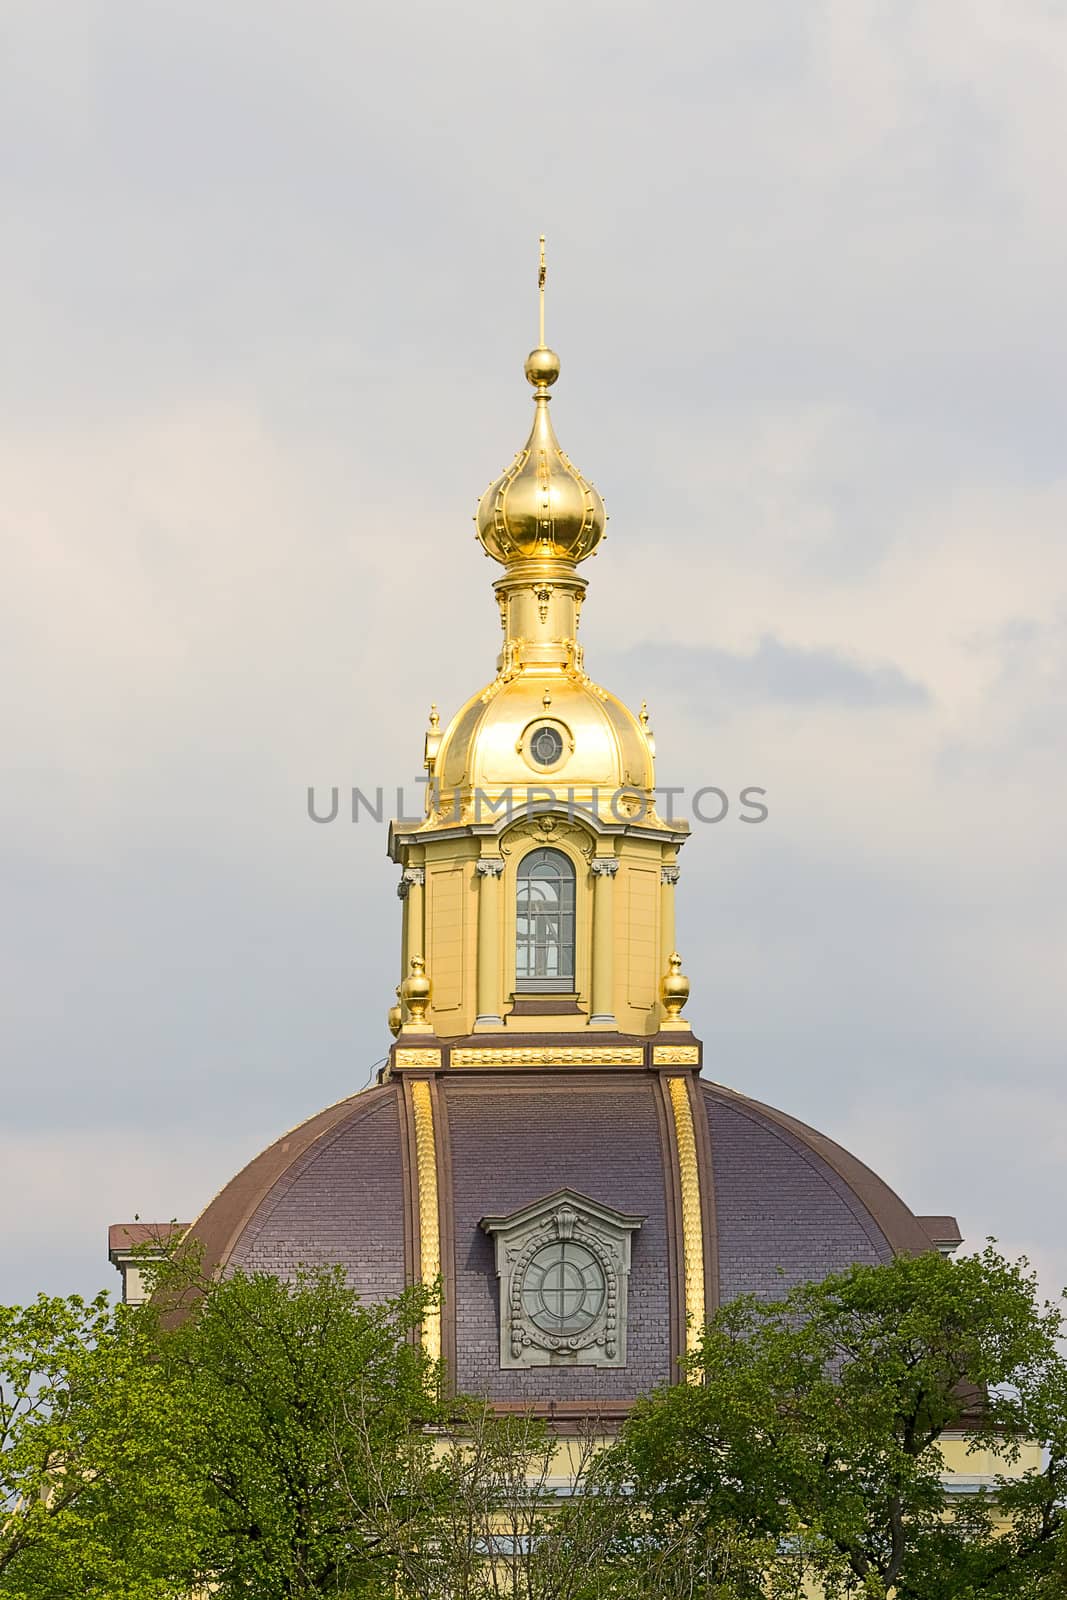 View of dome of church among trees, Saint Petersburg, Russia.